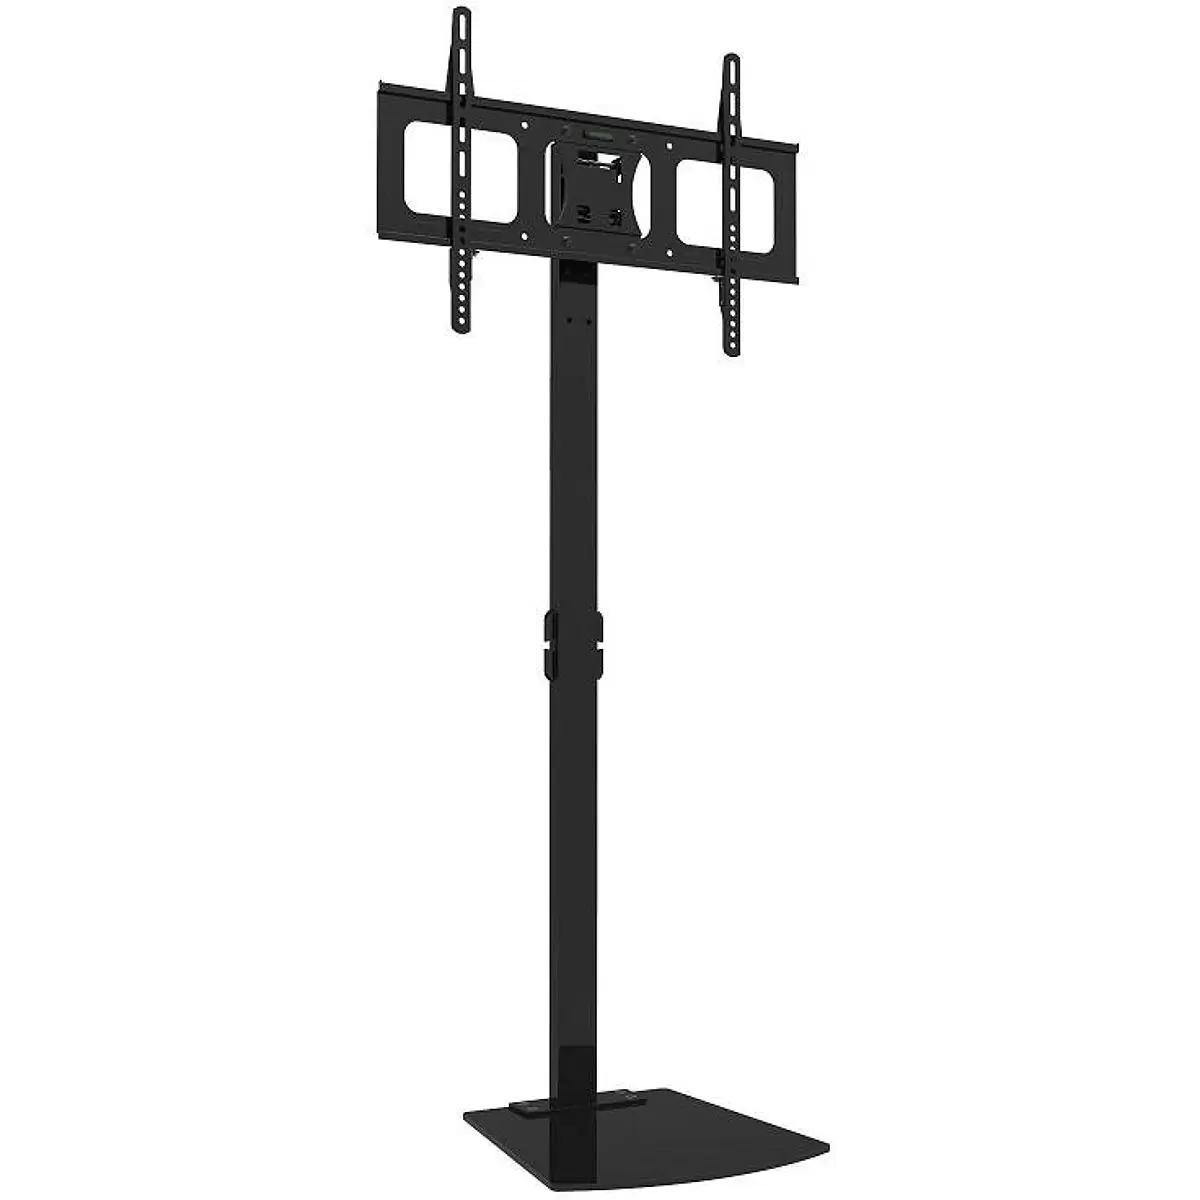 TECHLY 028832 Floor stand for TV